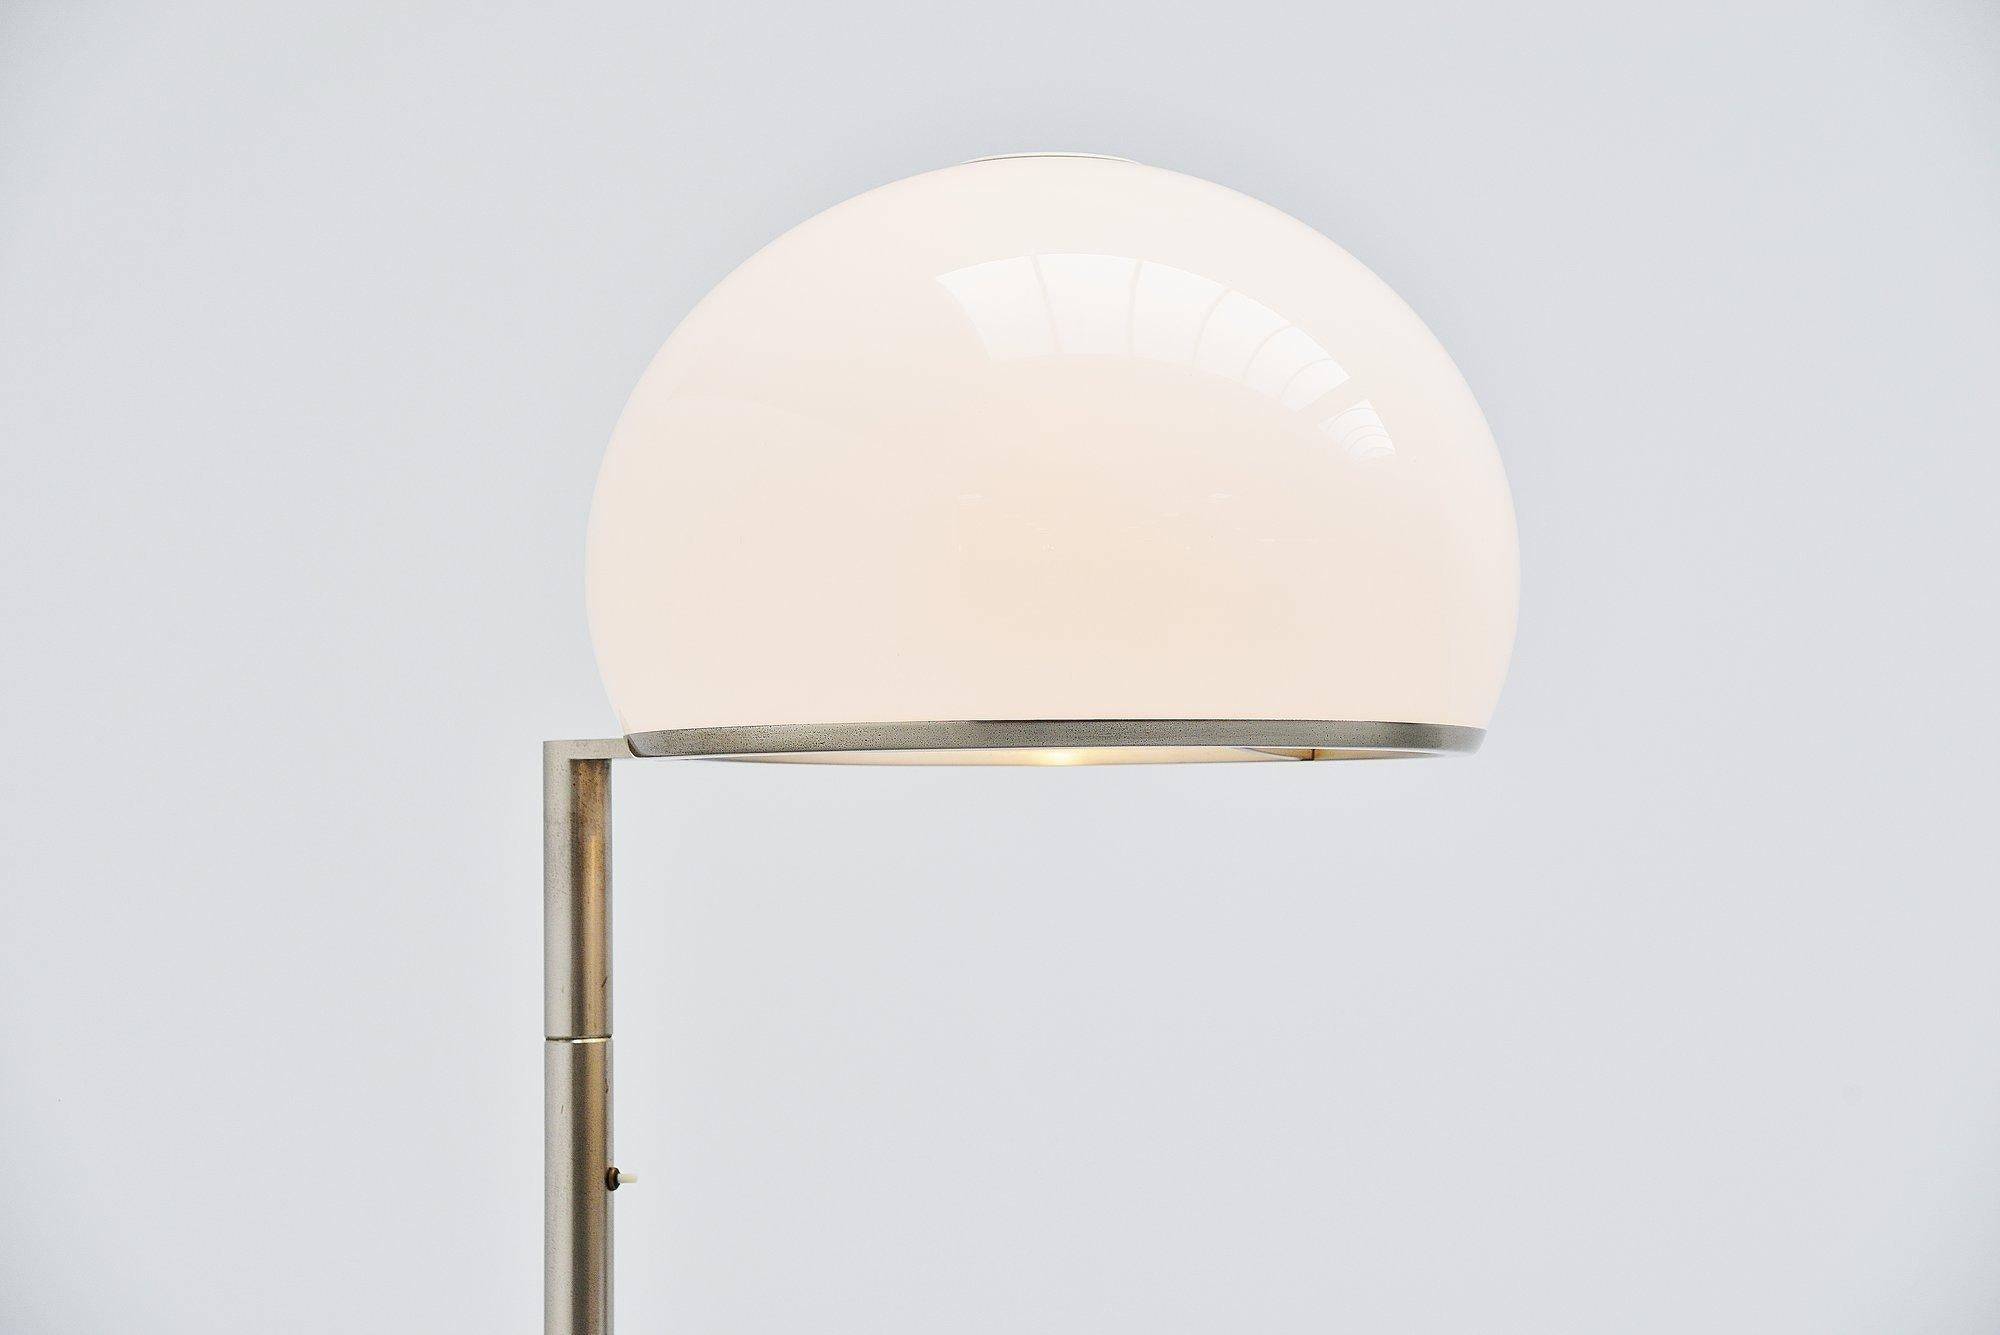 Rare floor lamp model 2051 designed by Vittorio Gregotti, Lodovico Meneghetti and Giotto Stoppino and manufactured by Arteluce, Italy 1966. This is a very nice and large floor lamp. The lamp has a nickel plated metal stem and a plexiglass white